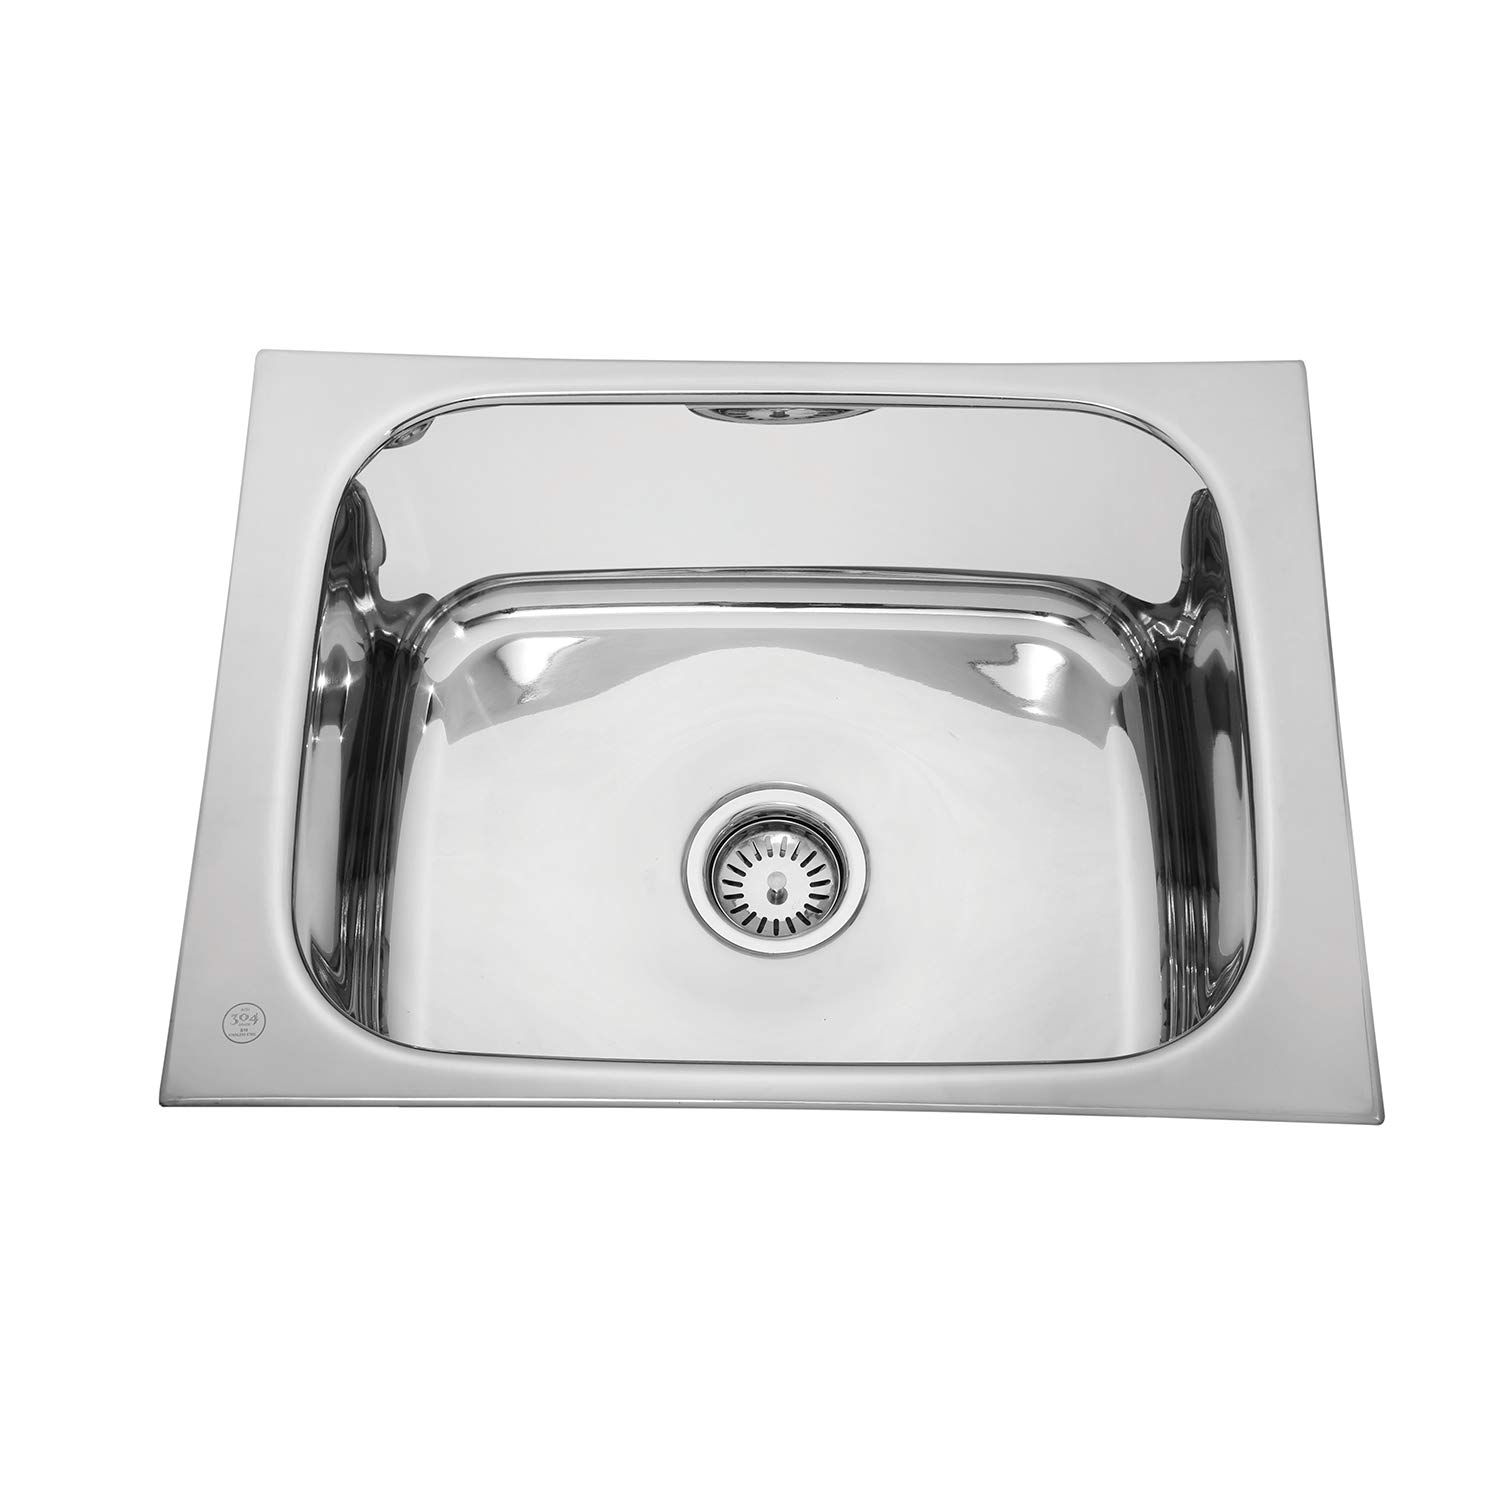 Parryware C857271 Eco Series (New) Flat Edge- Gloss Finish Single Bowl Kitchen Sink